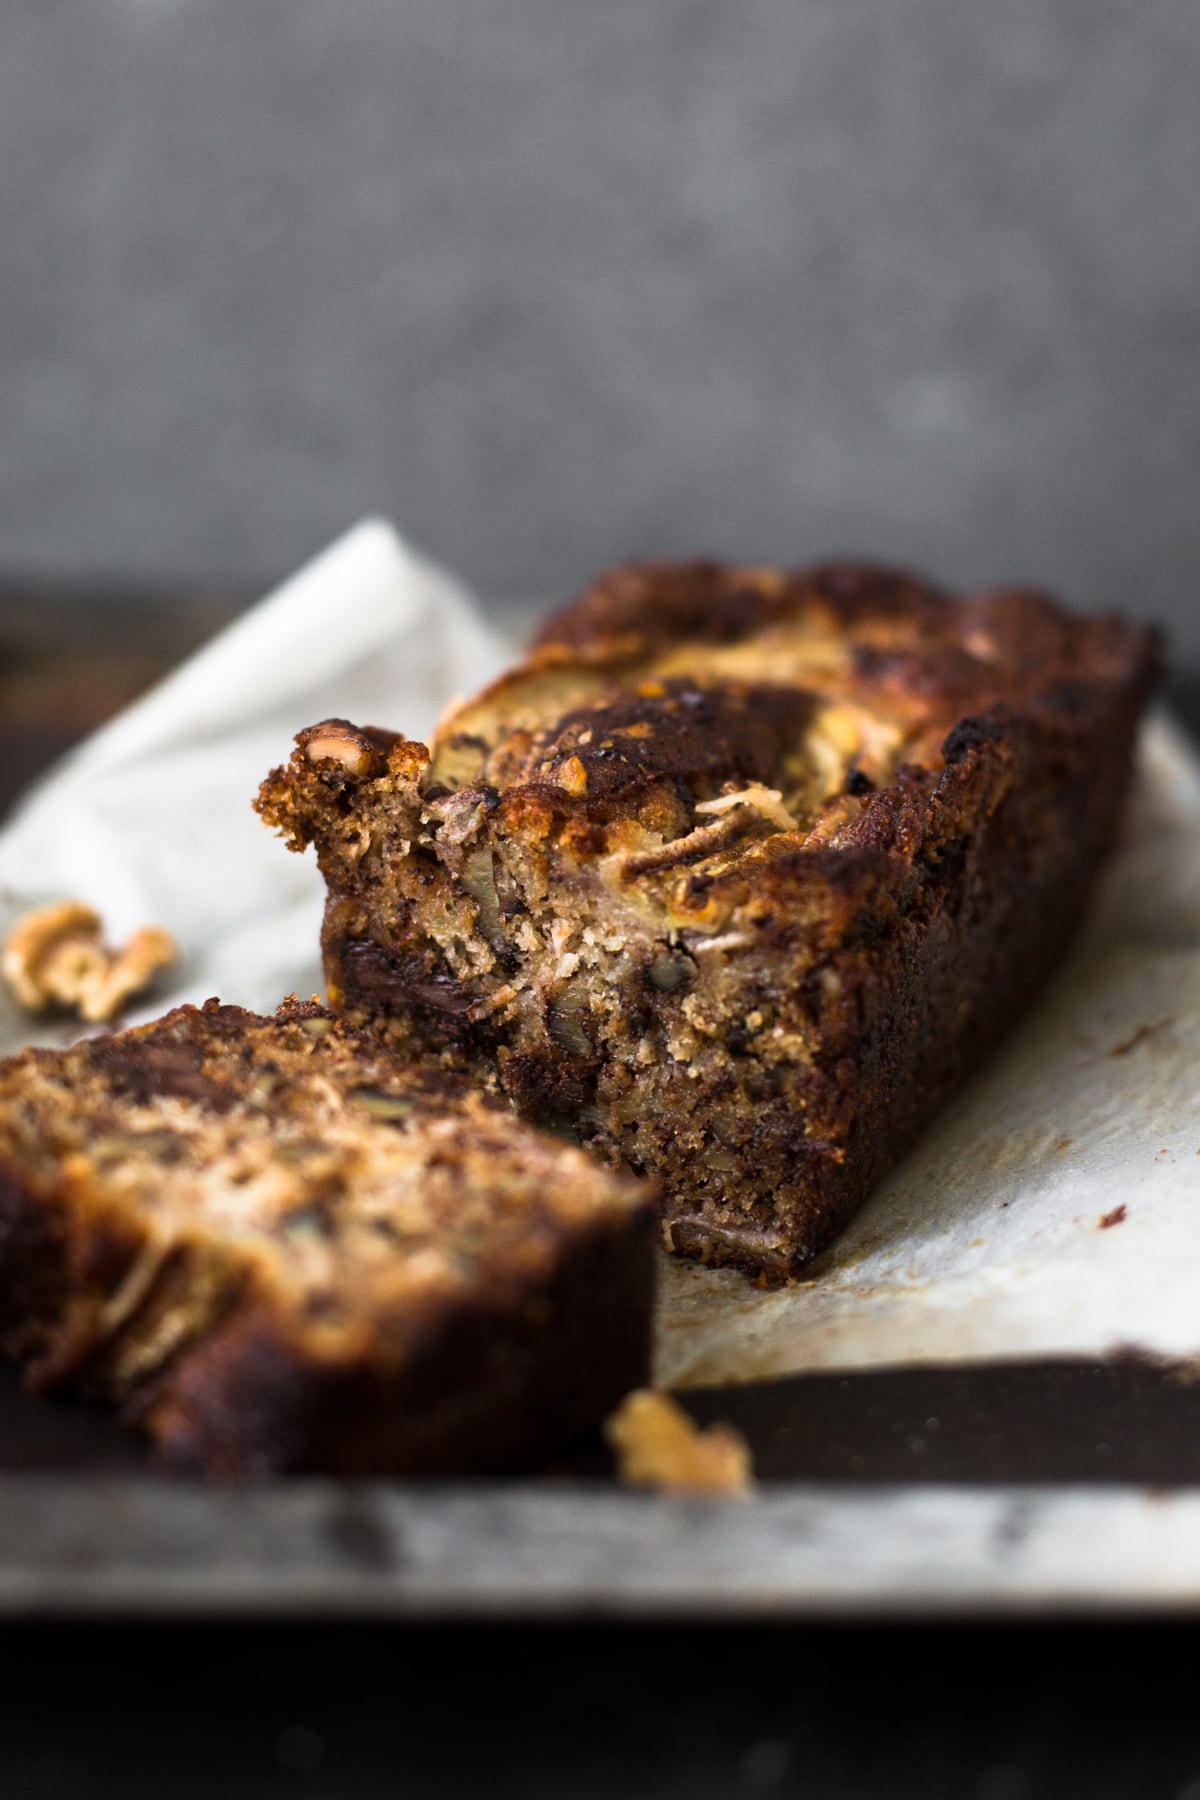 A delicious Vegan Banana Bread recipe loaded with Walnuts, Dark Chocolate and a Brown Sugar Cinnamon Swirl in the middle. Ready in under 1 hour. #bananabread #vegan #cinnamon #cinnamonswirl #quickbread #bananamuffins #veganbaking #veganbananabread #easy #simple #walnuts #chocolate #eggless #baking #dessert #breakfast